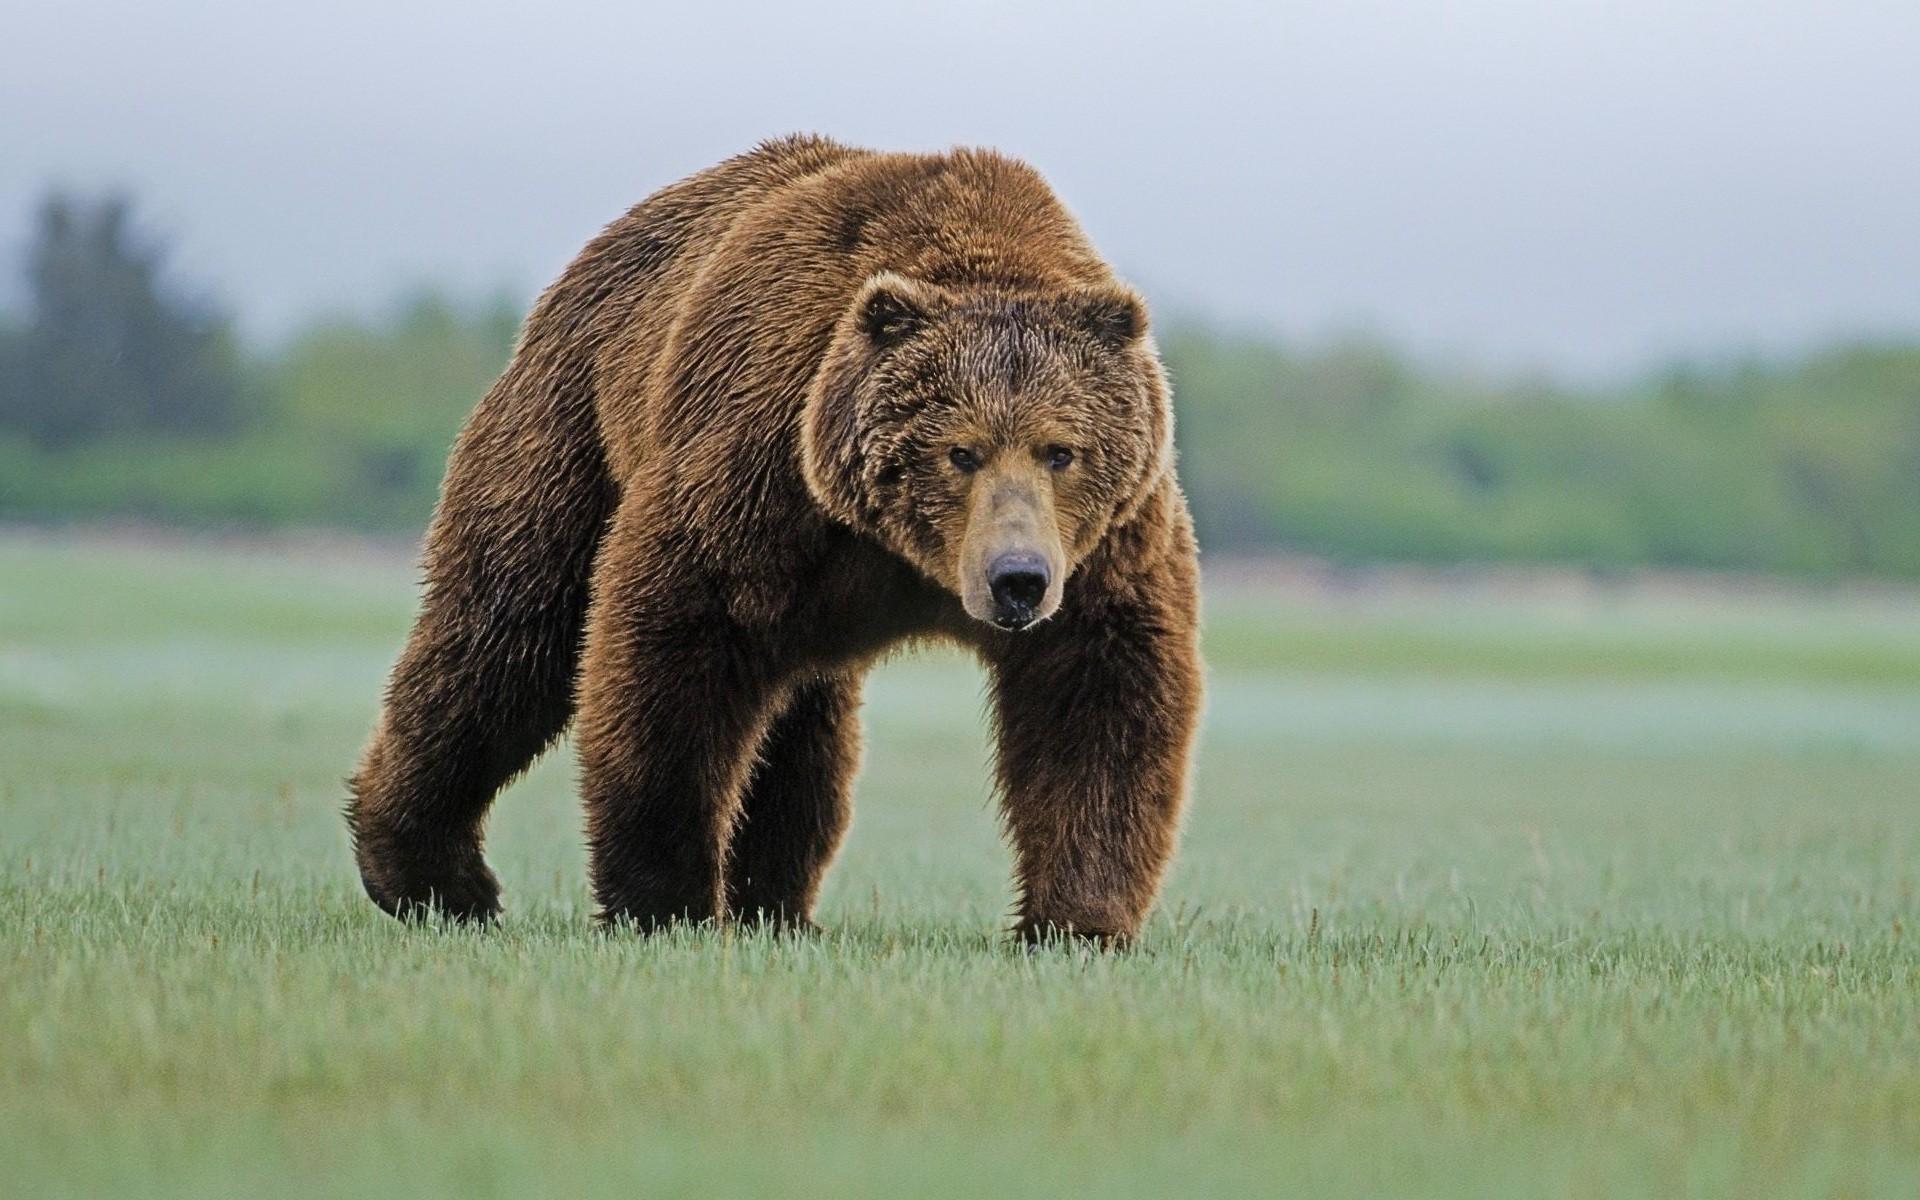 Wallpaper, animals, nature, grass, wildlife, bears, Grizzly Bears